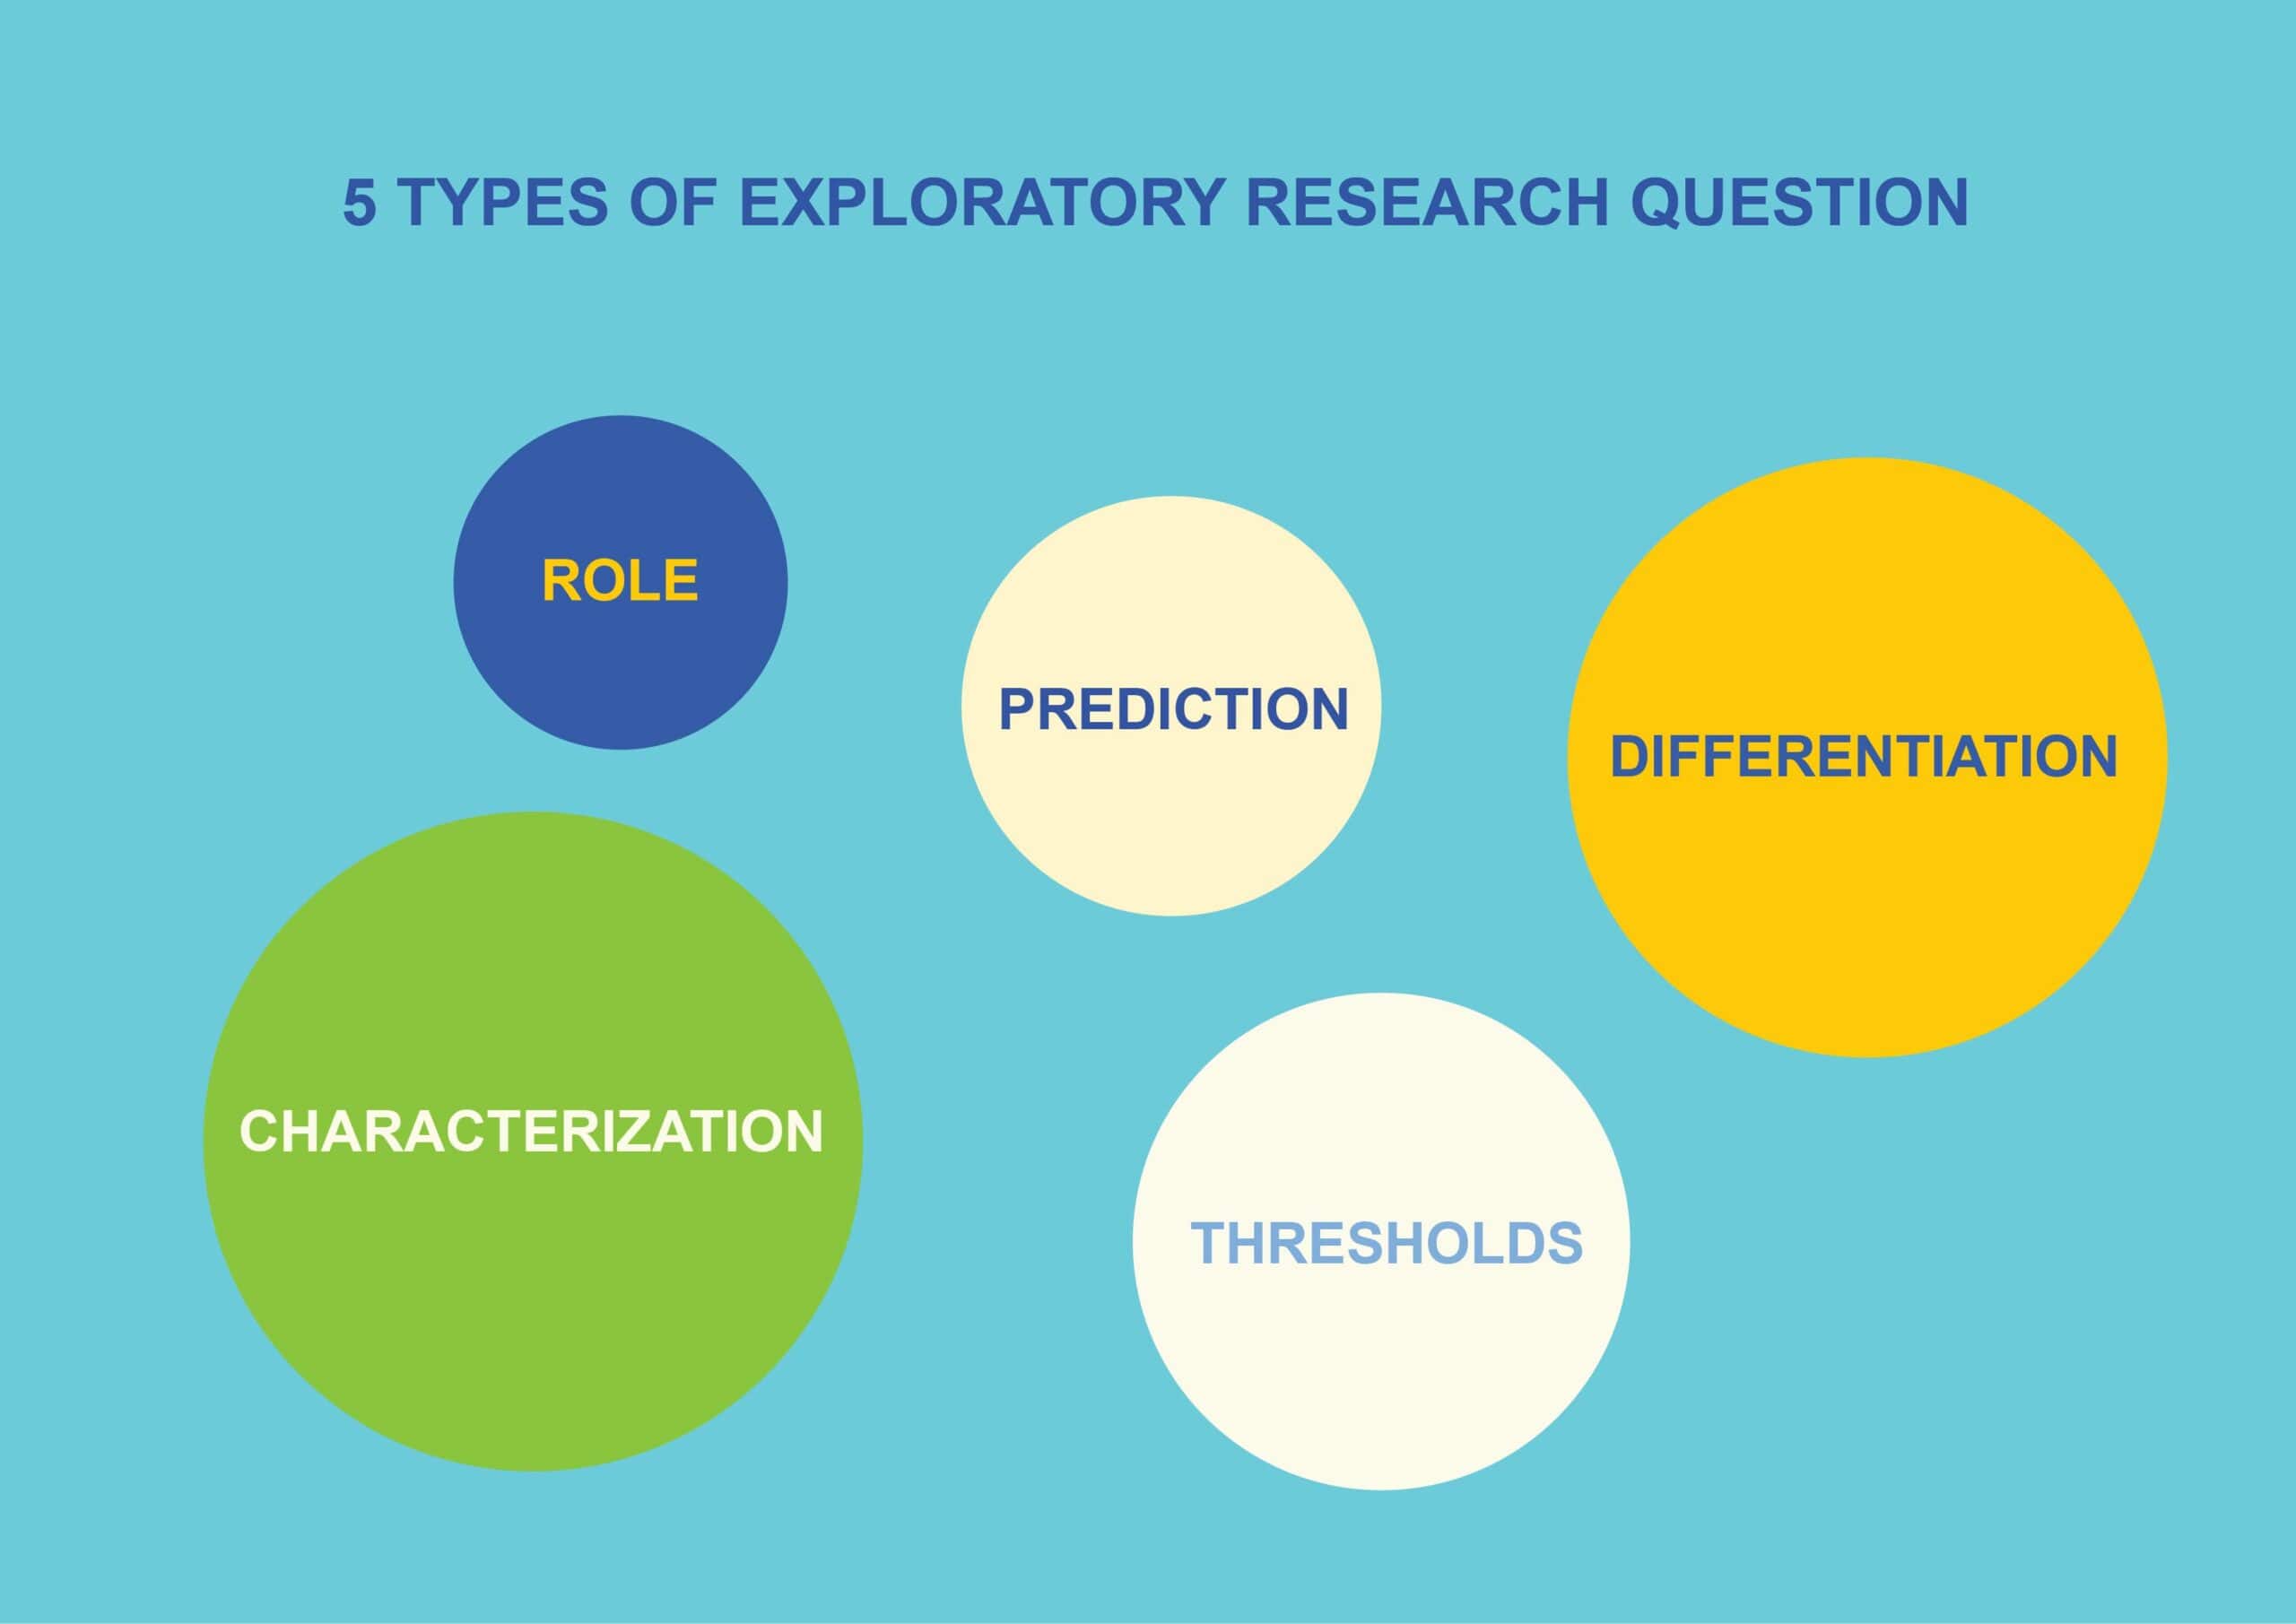 5TYPES OF EXPLORATORY RESEARCH 01